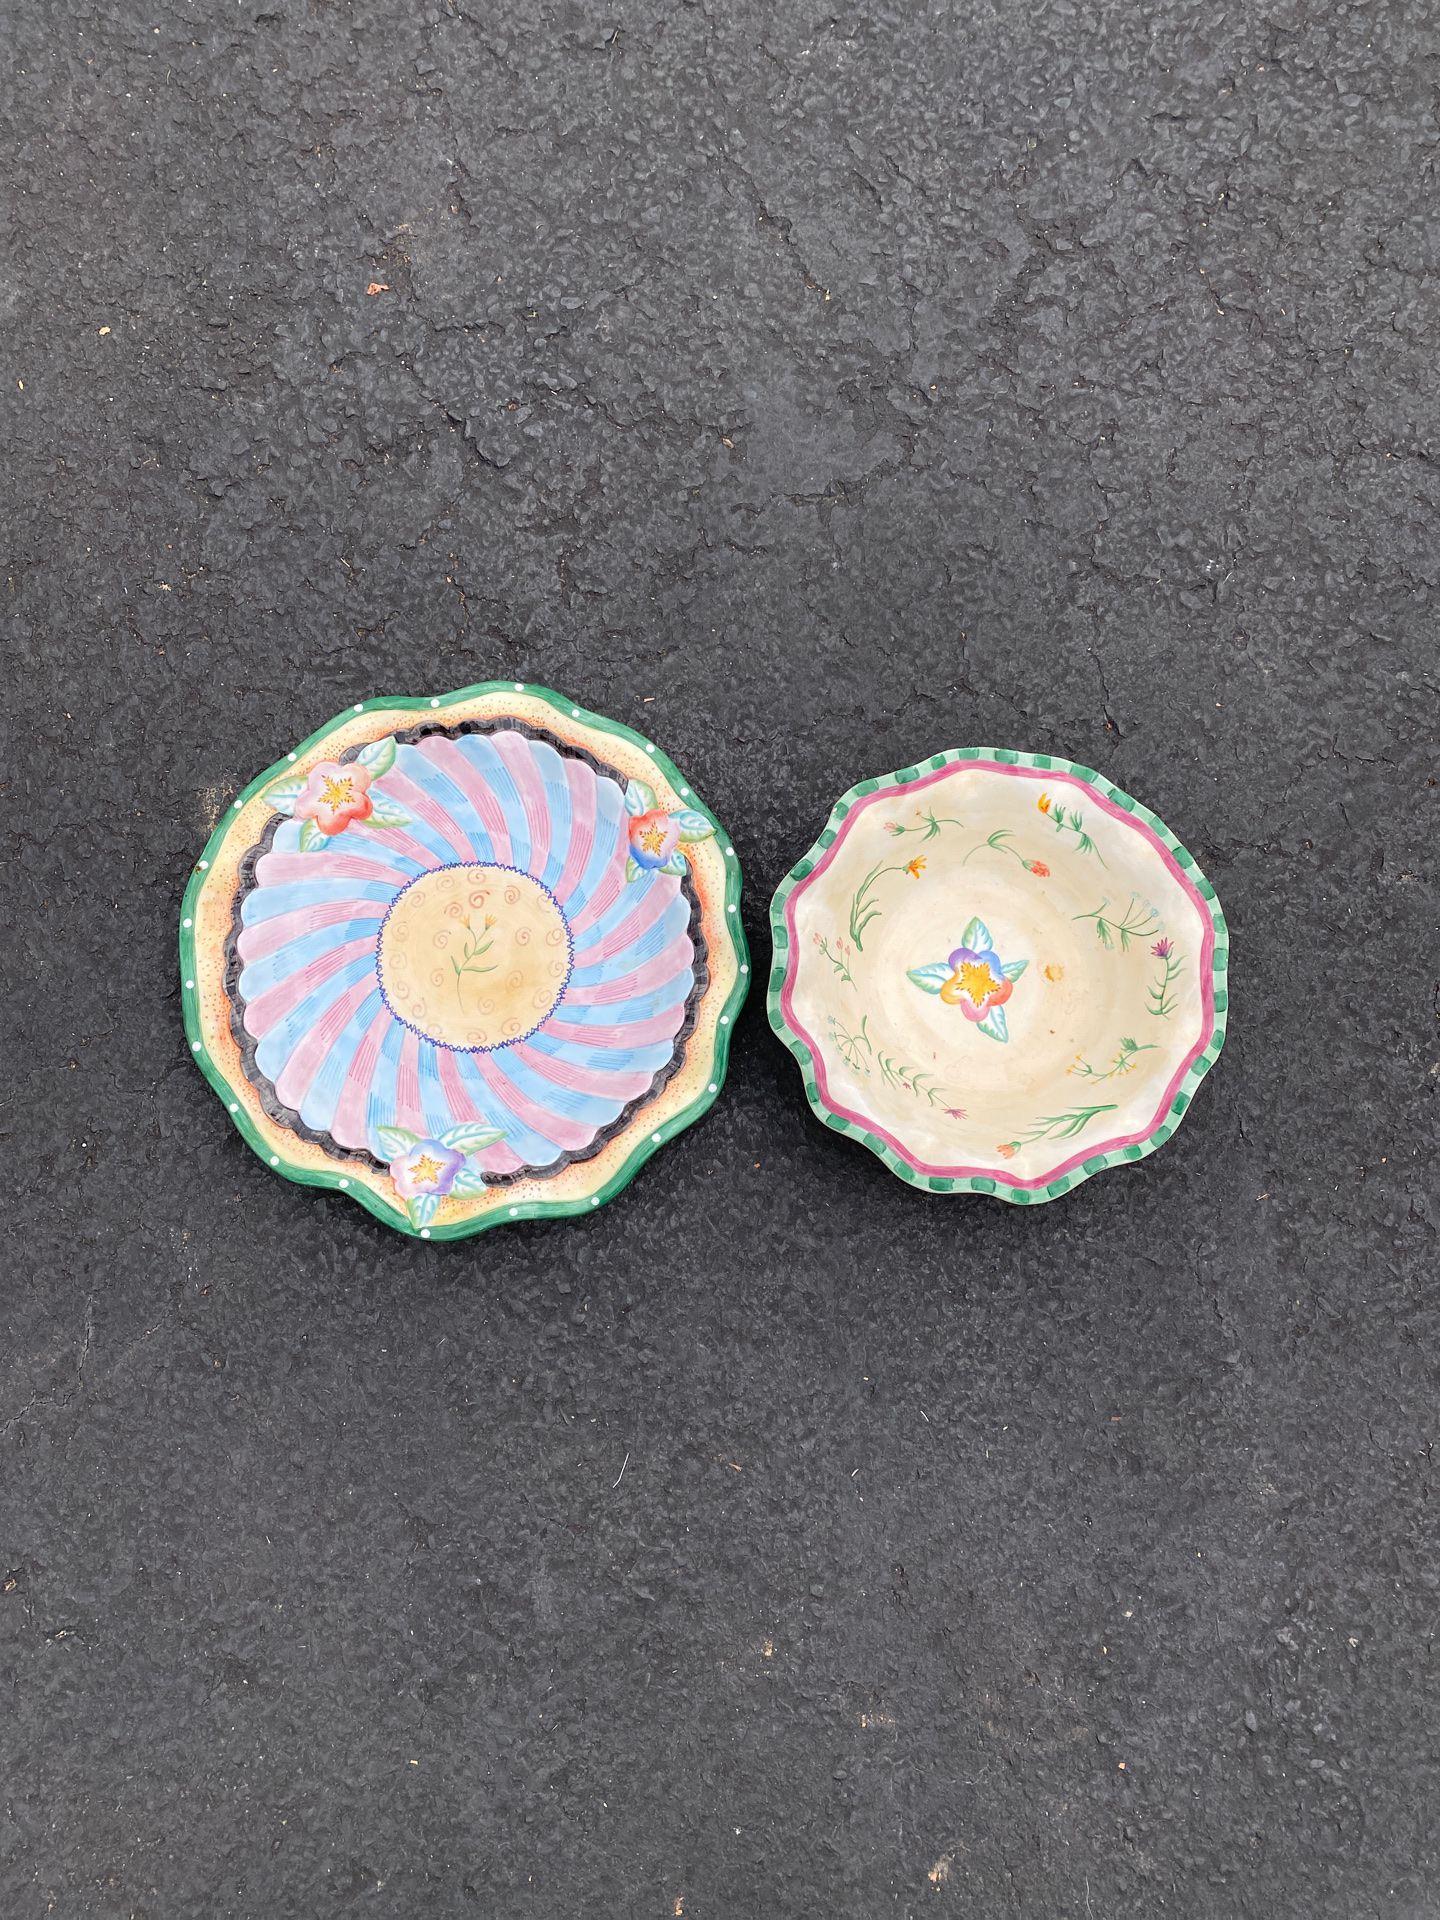 Serving Dishes-Plate and Bowl